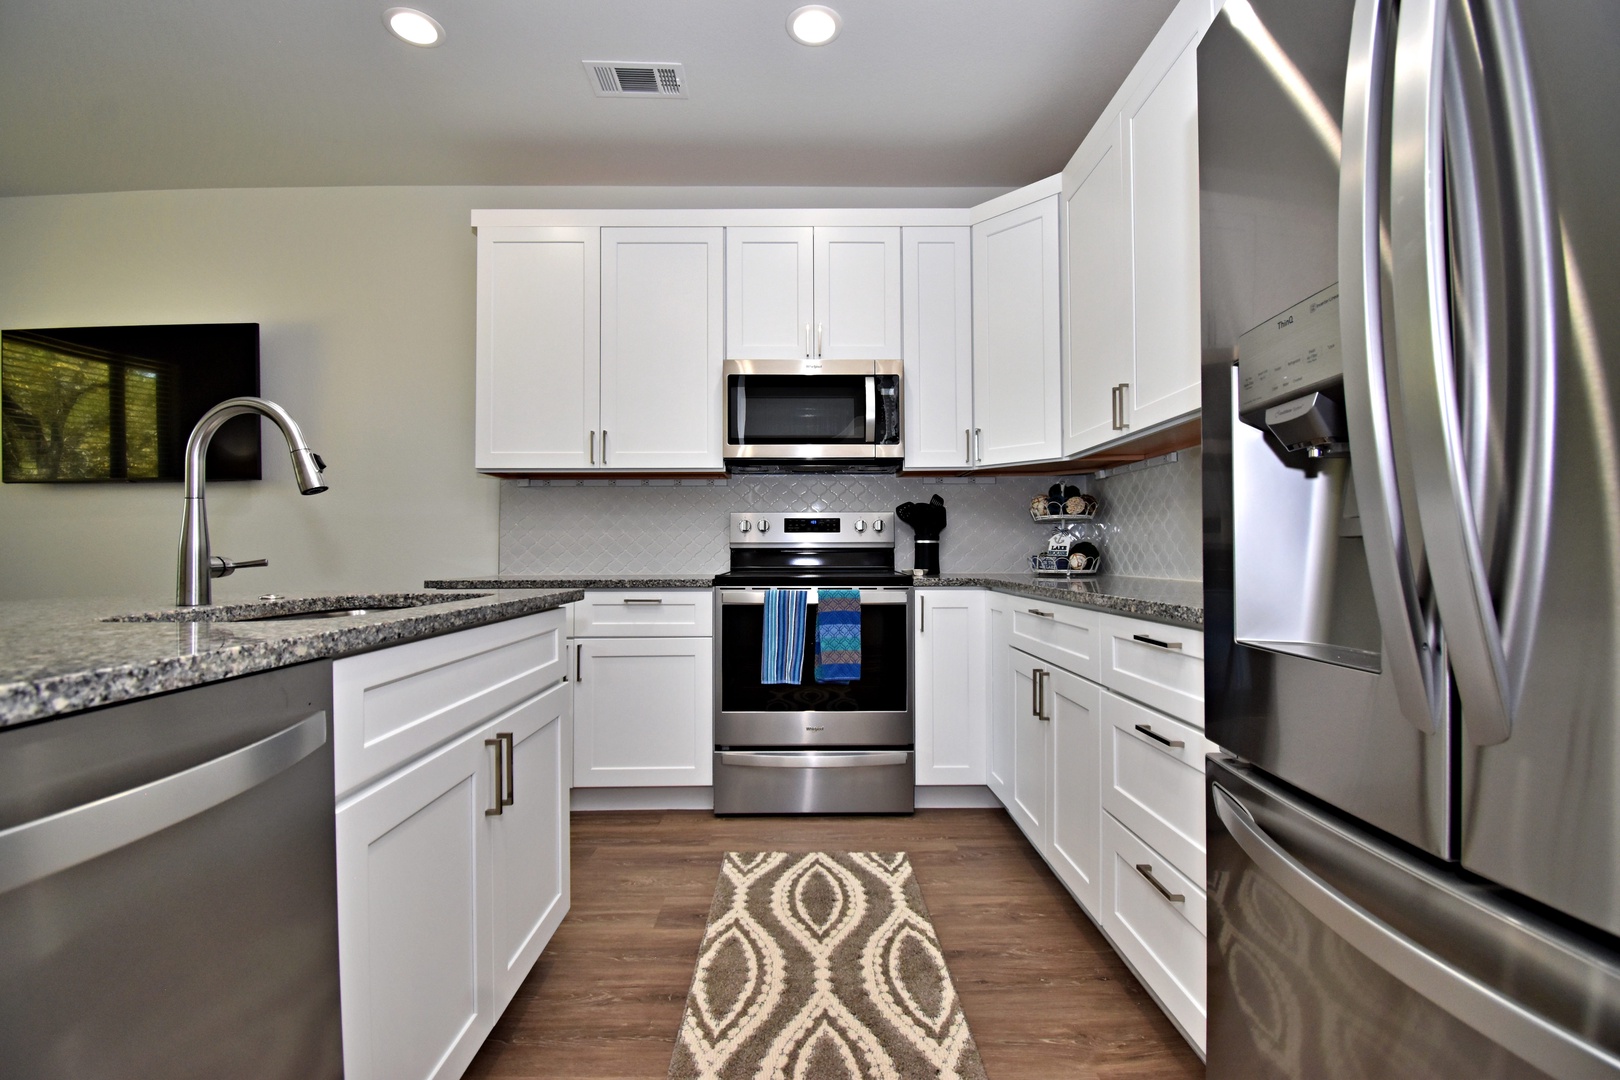 Full kitchen with stainless-steel appliances